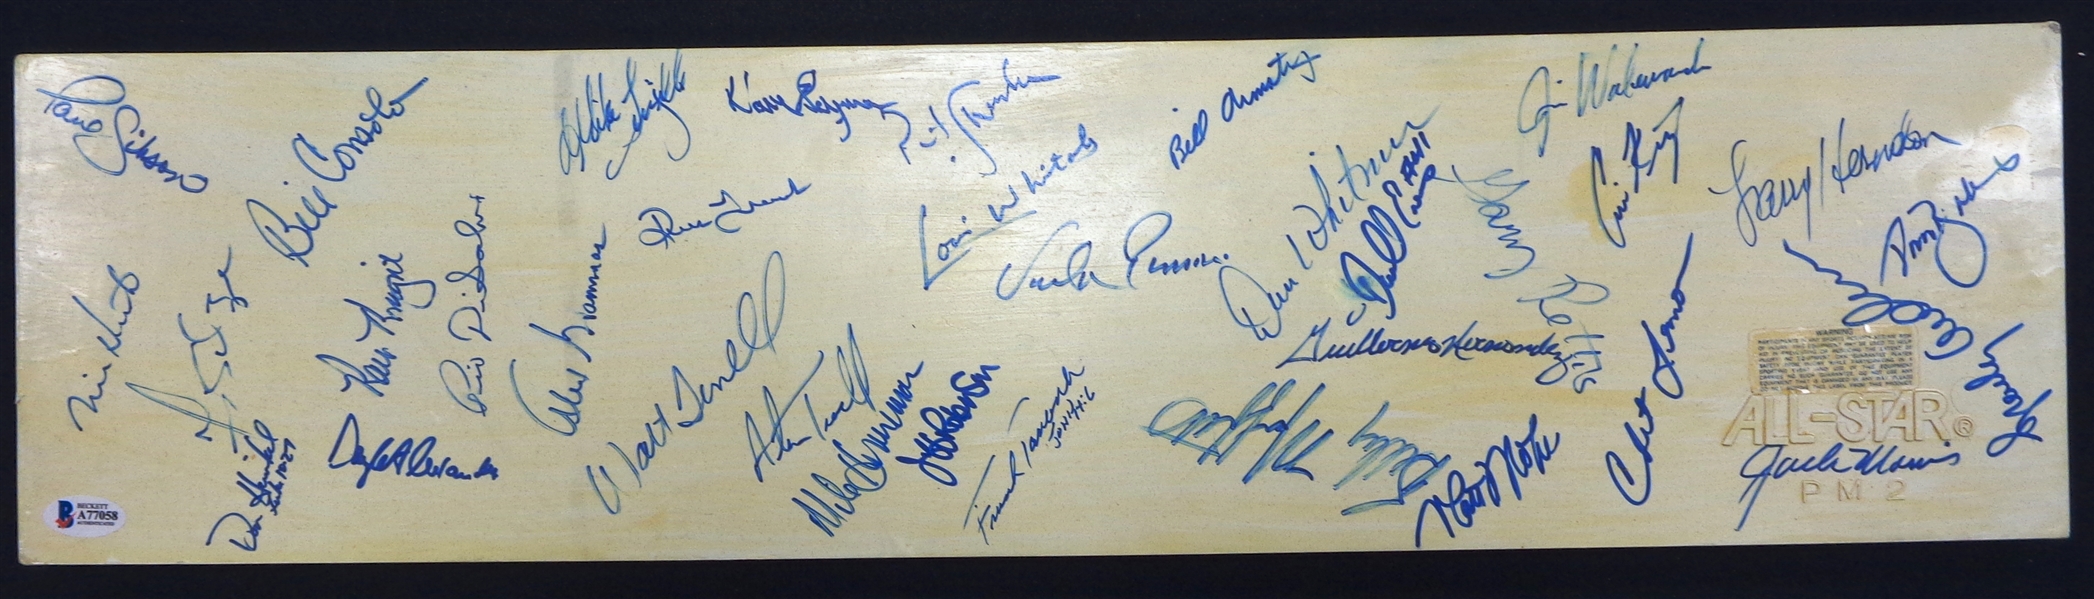 Detroit Tigers 1988 Team Signed Pitching Rubber